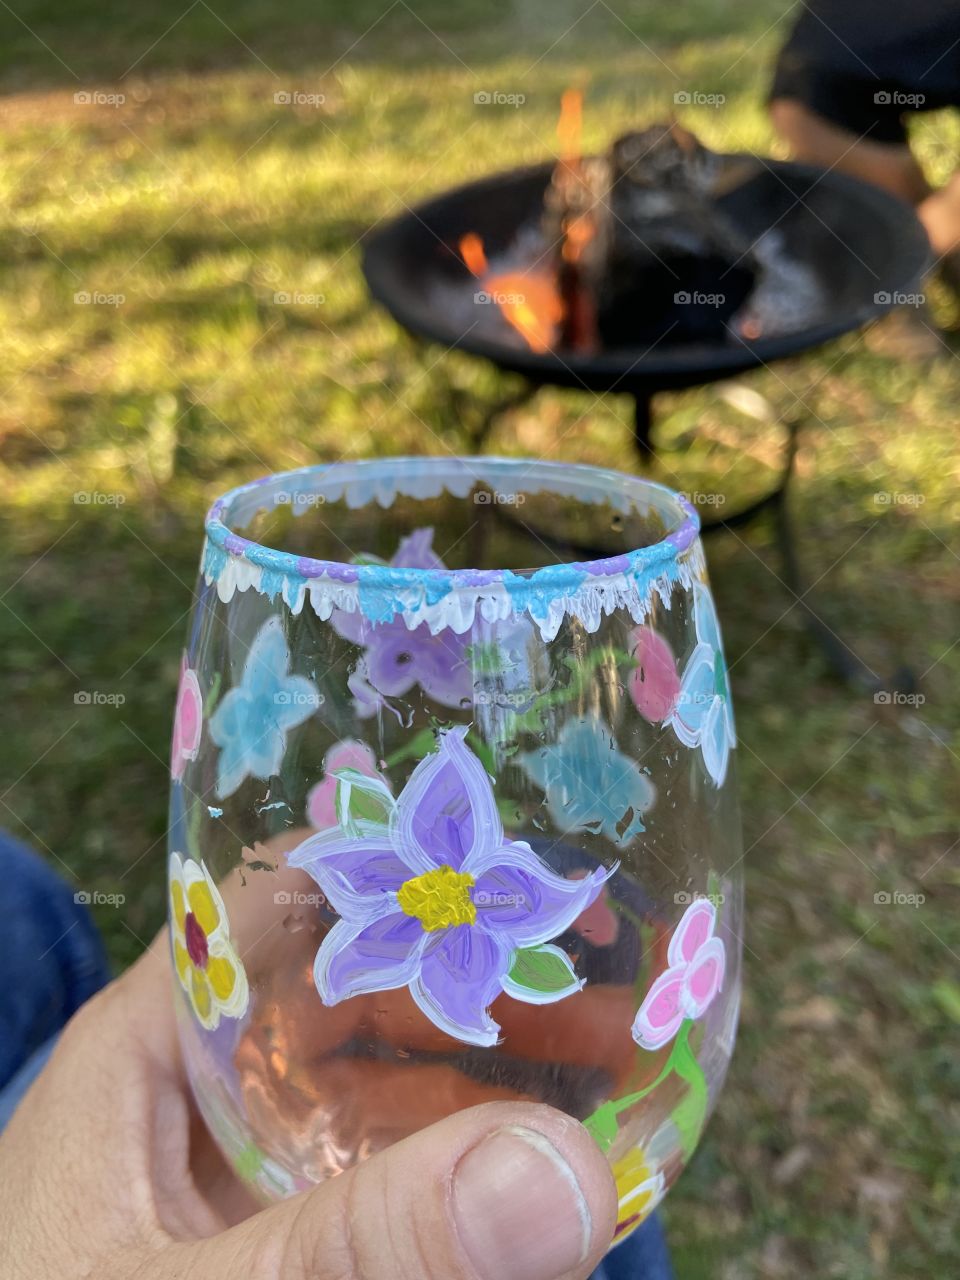 A glass of wine and a non fire